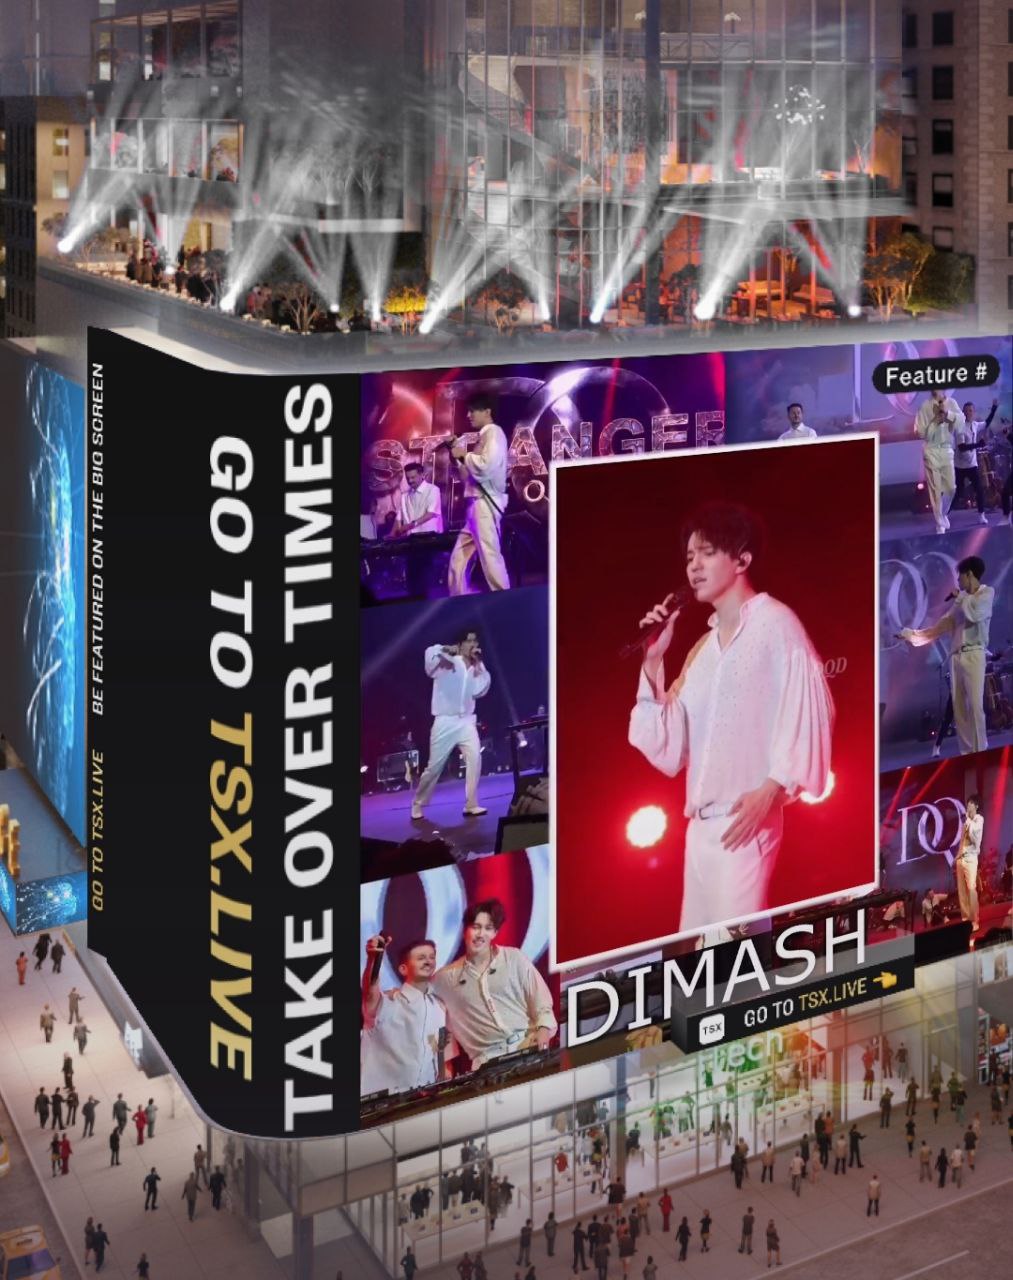 Dimash is represented for the fifth time in Times Square in New York City